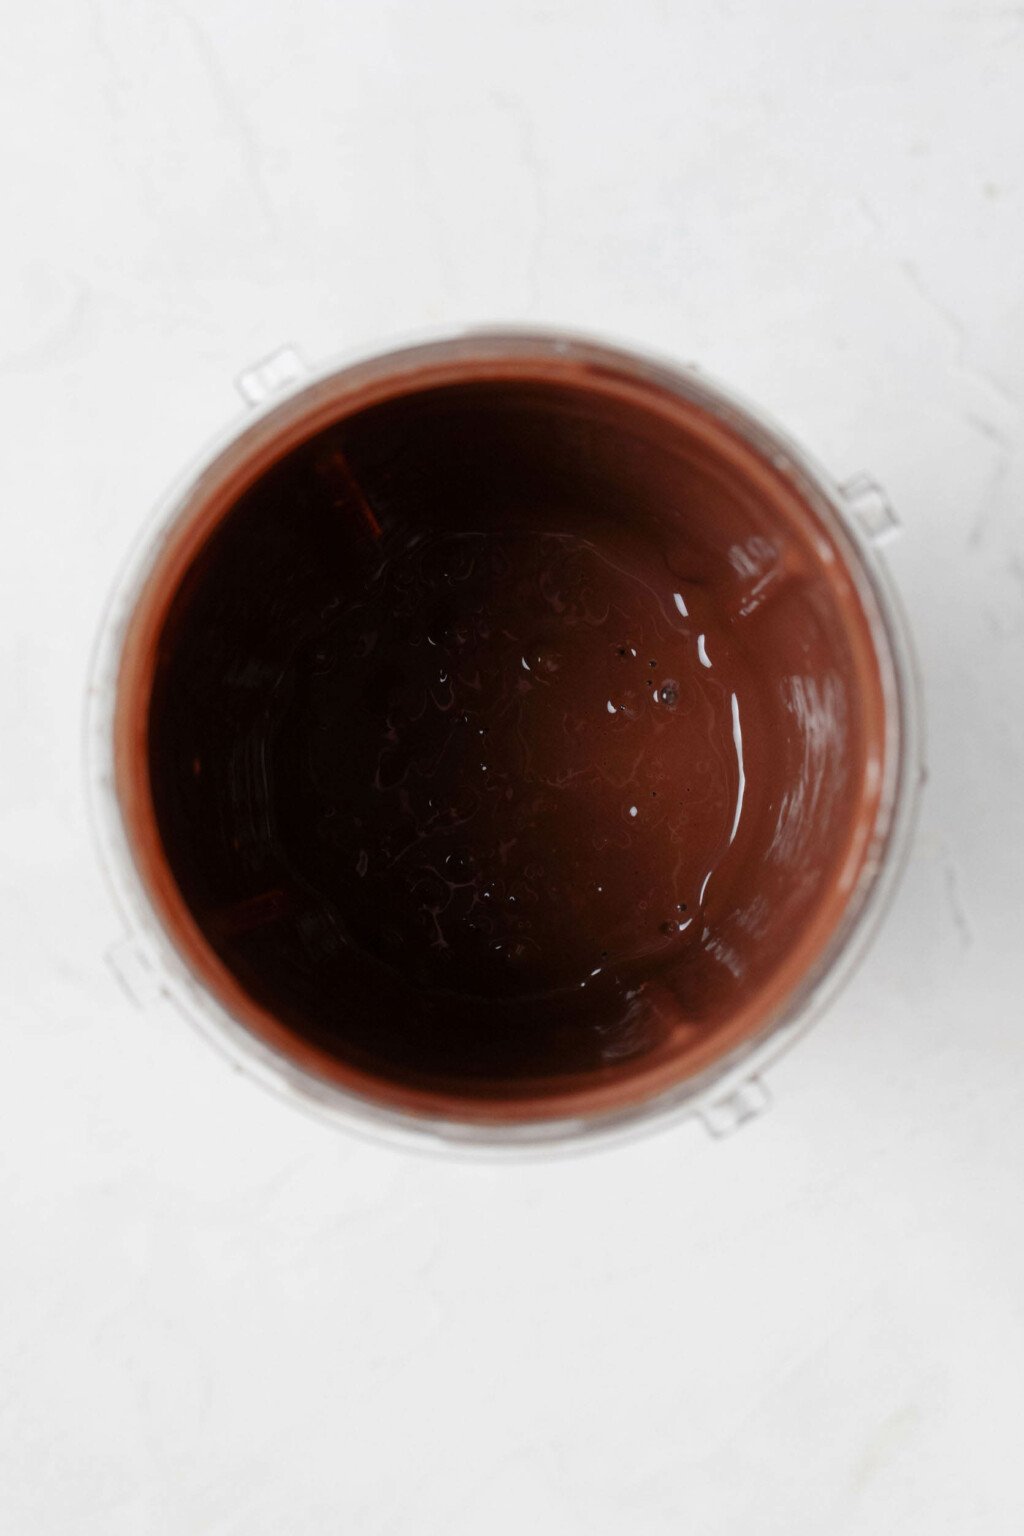 An overhead image of a portable blender, which is filled with a homemade chocolate pudding mixture.